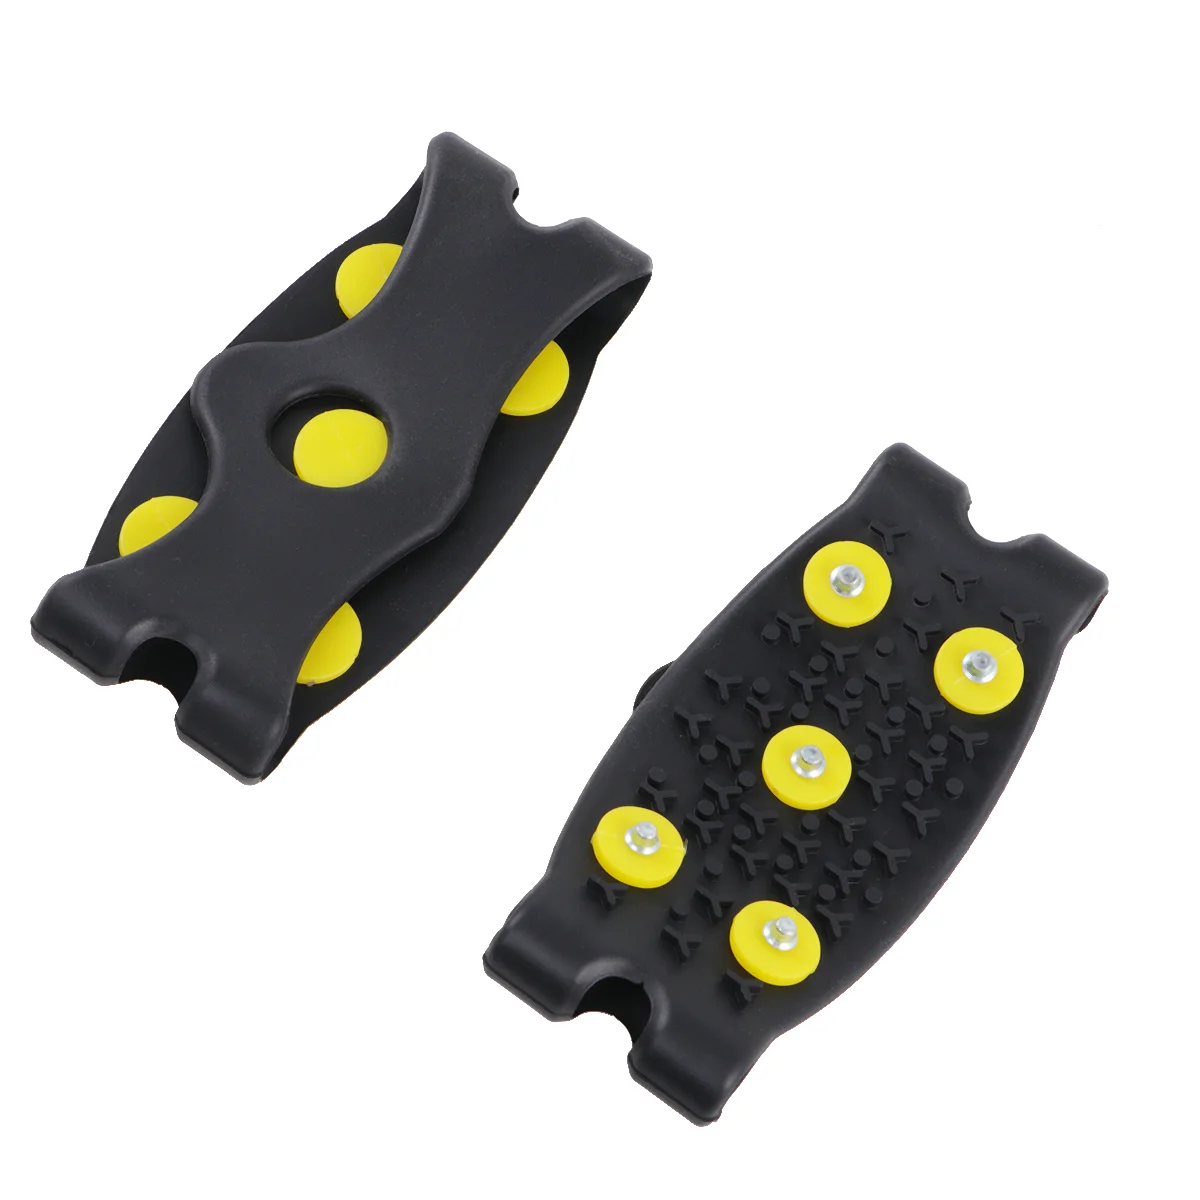 

1 Pair Cleats Traction Cleats 5- Stud Grippers Shoe Snow Grips For Walking Jogging Climbing And Hiking Black